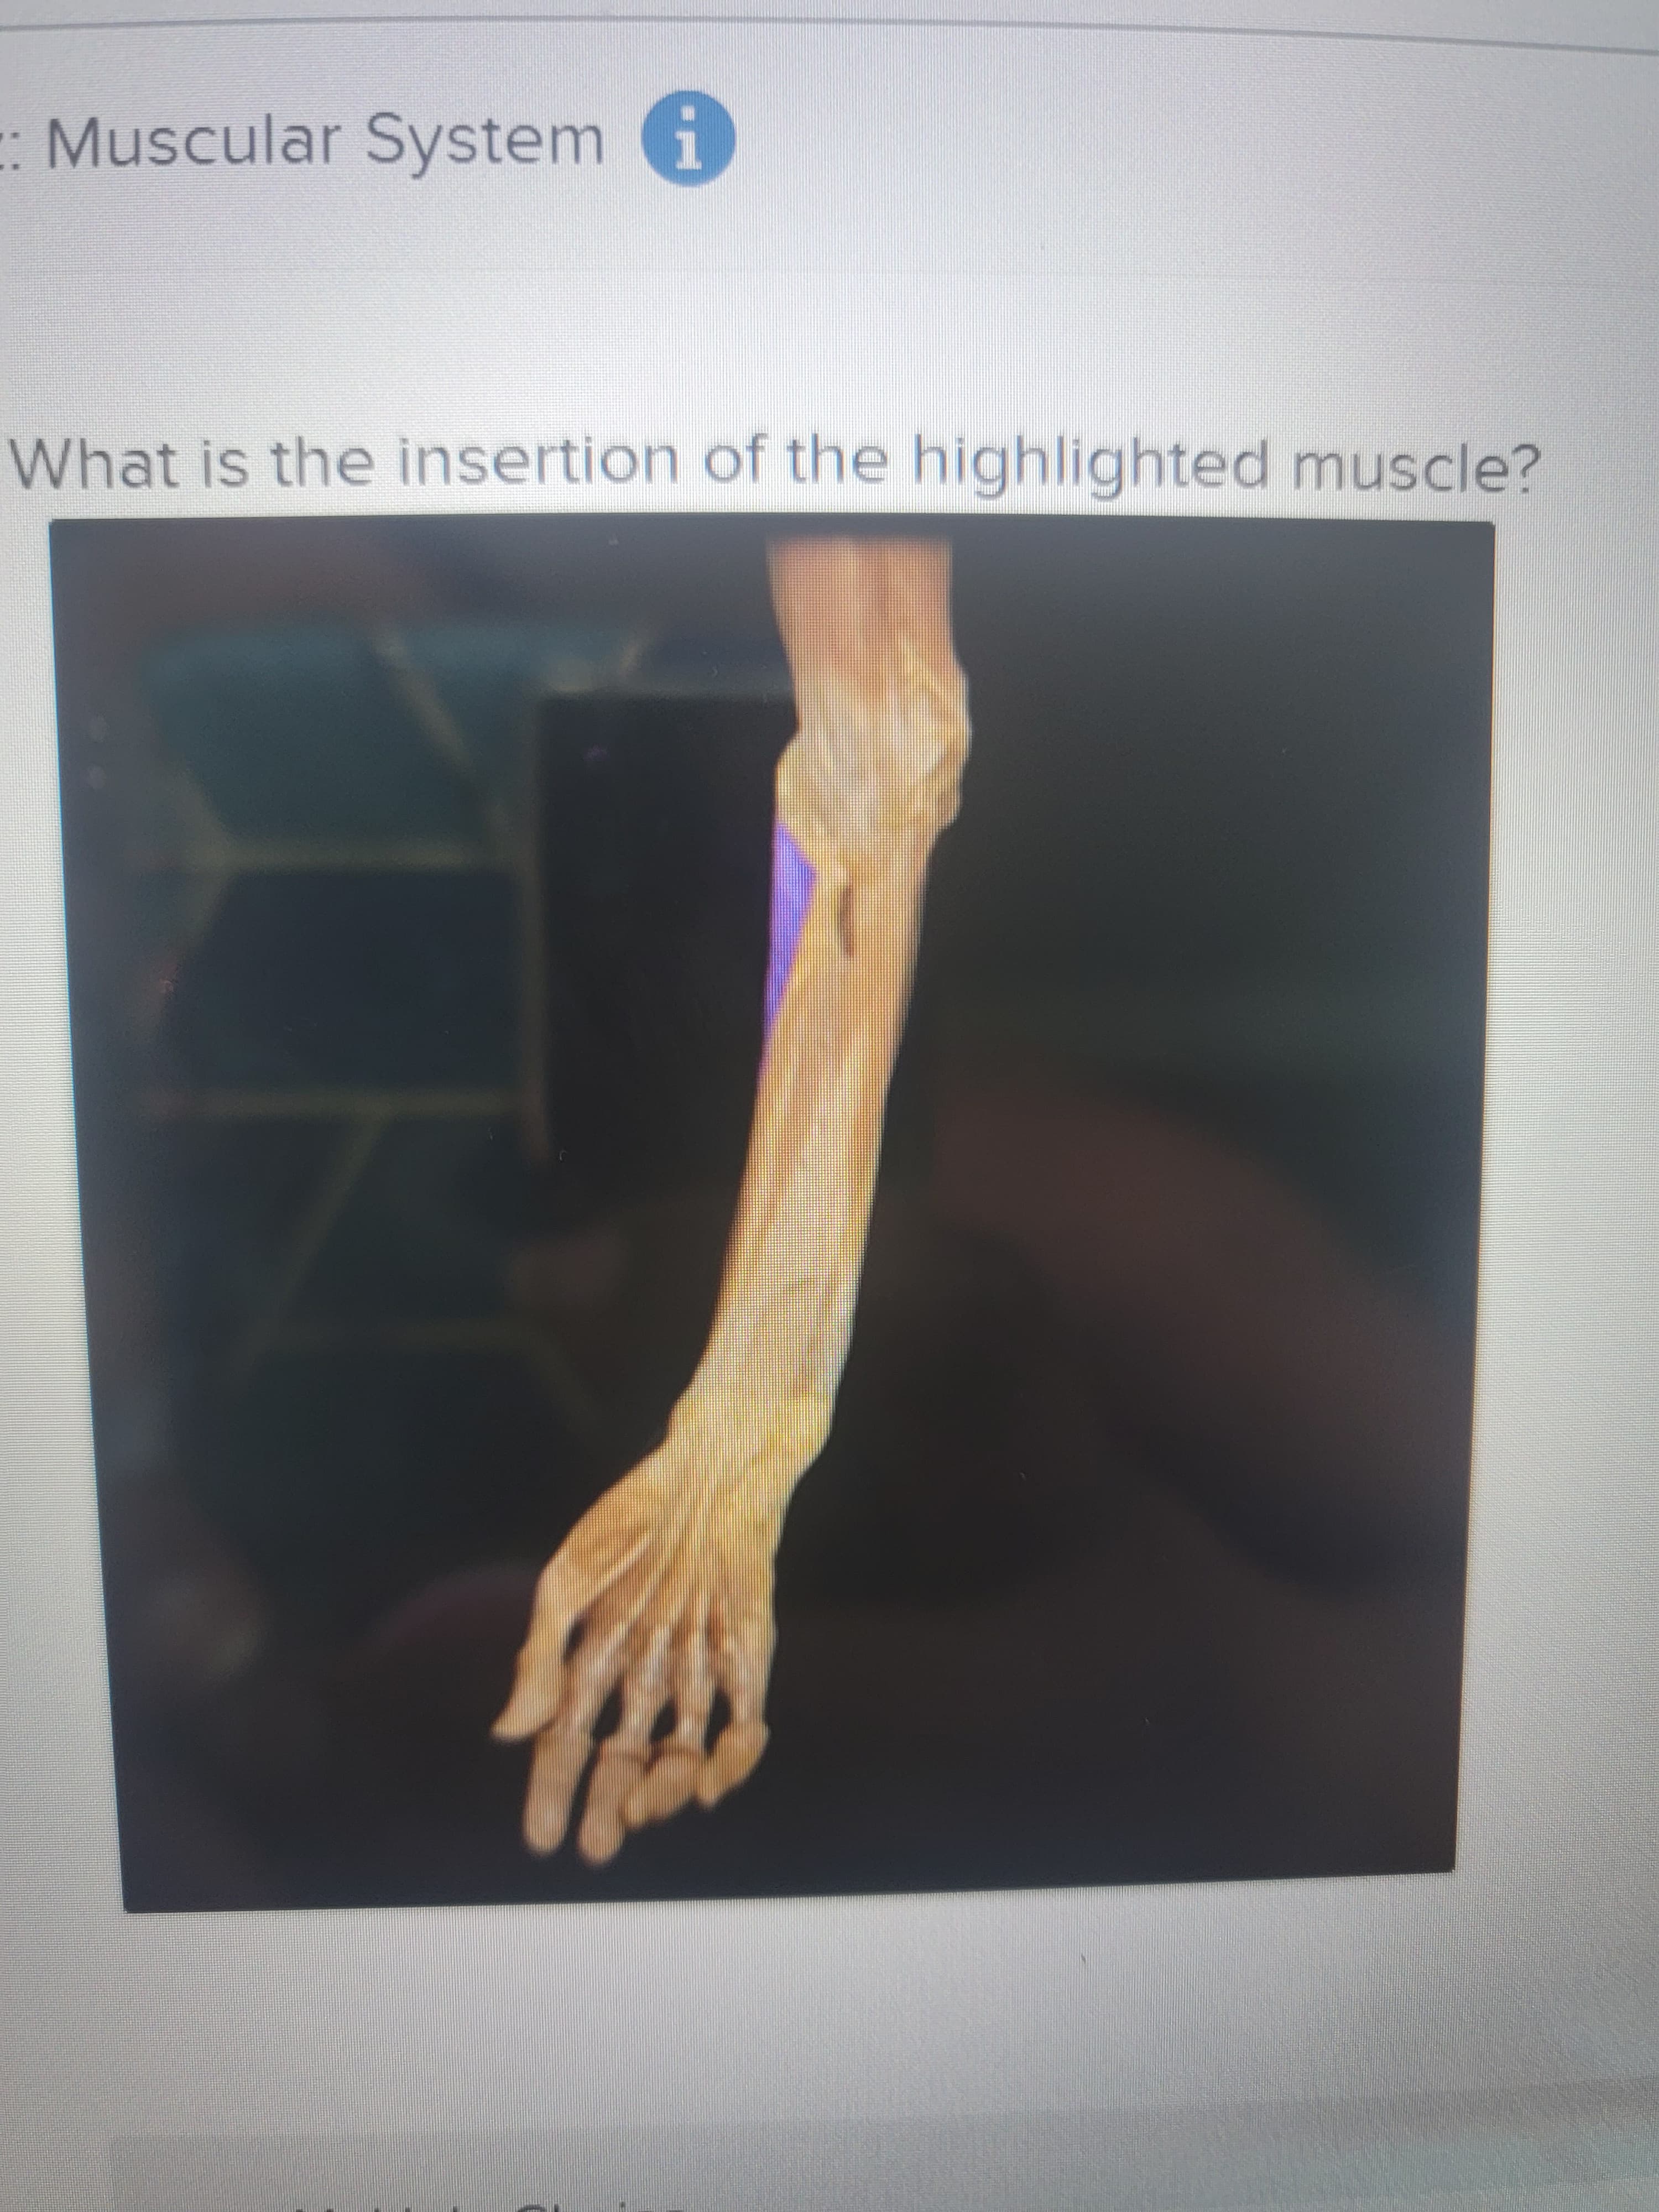 : Muscular System i
What is the insertion of the highlighted muscle?
